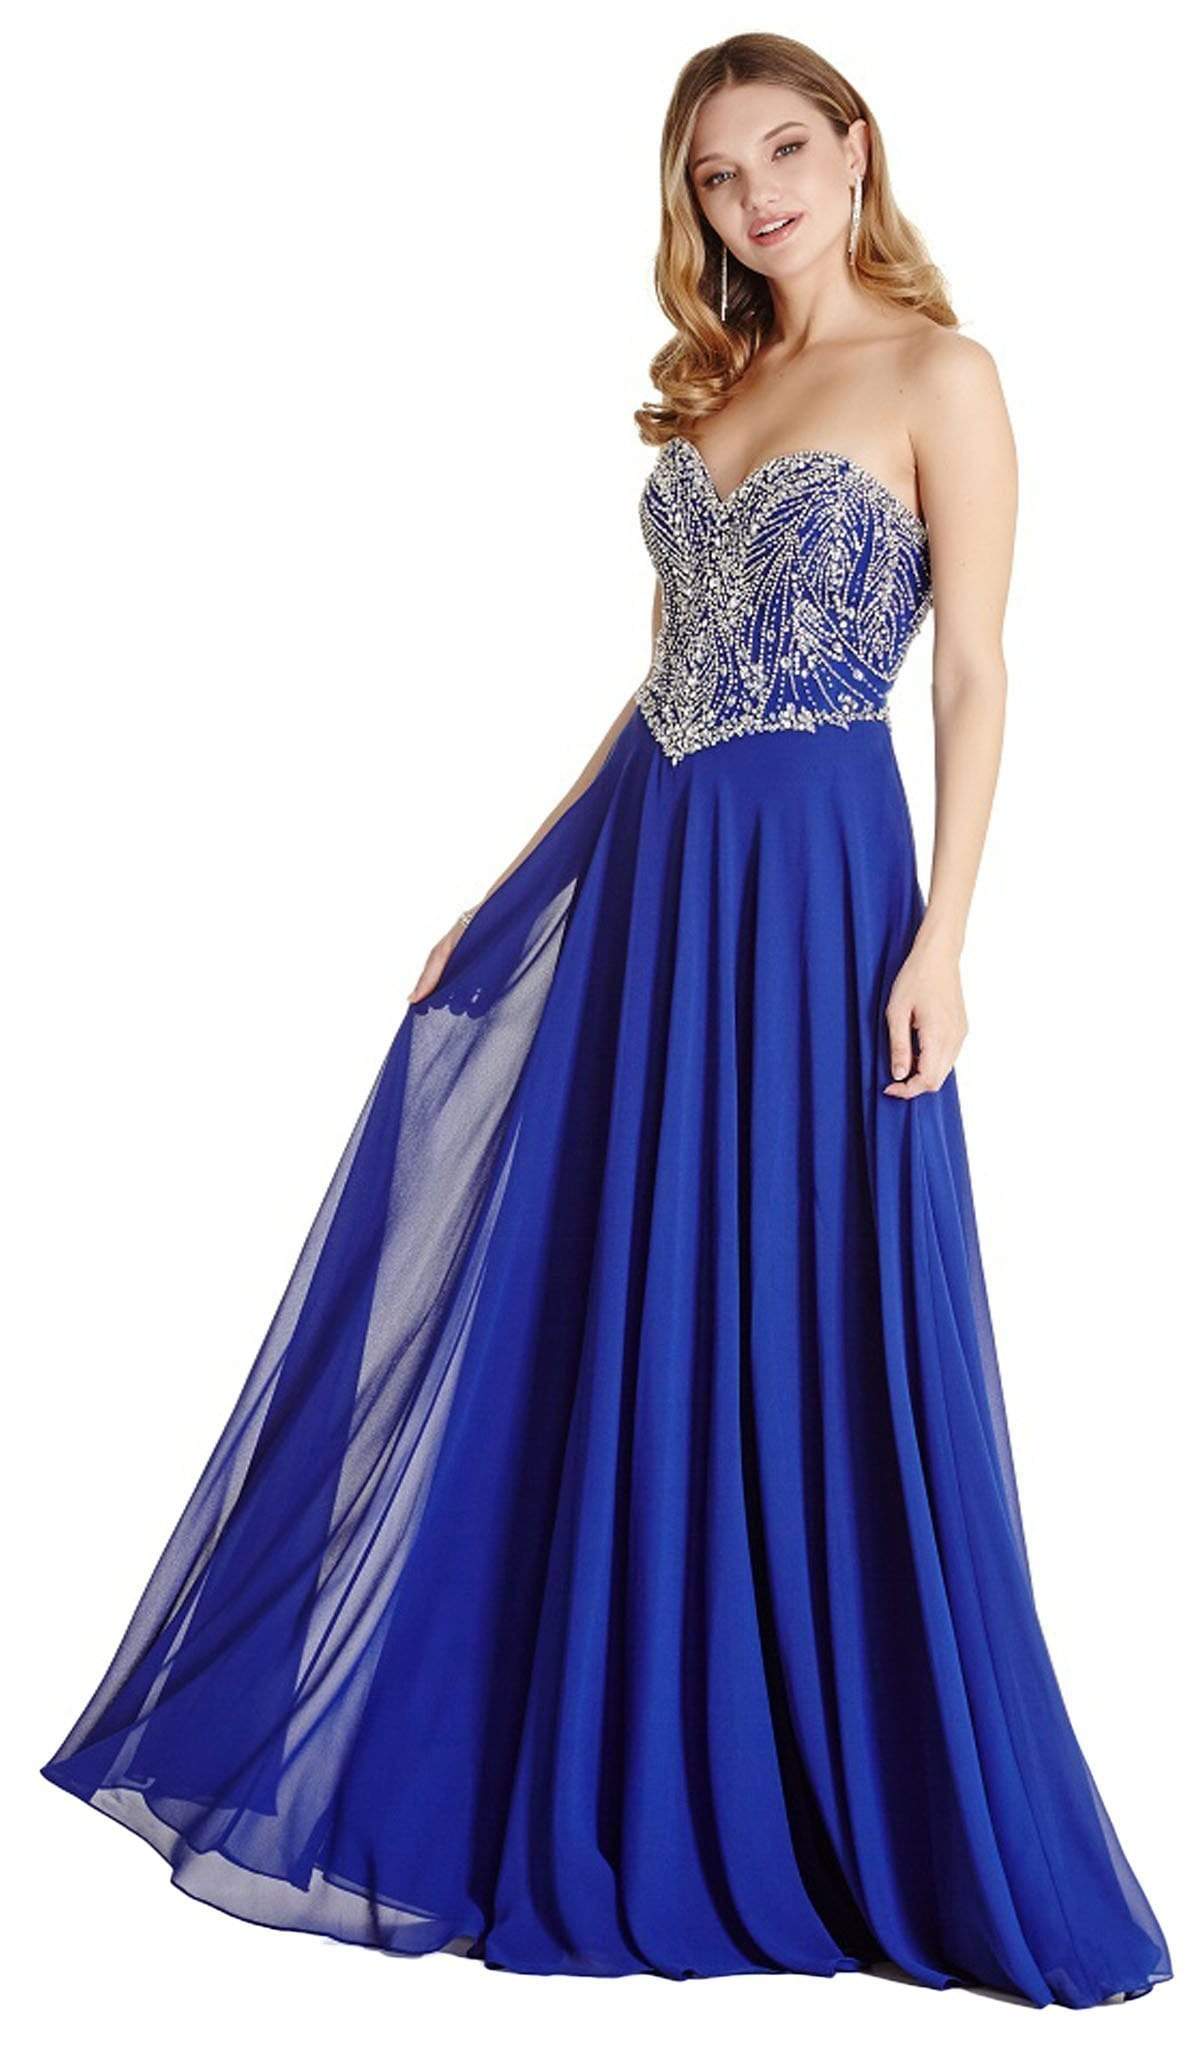 Image of Aspeed Design - Bedazzled Sweetheart Prom Dress